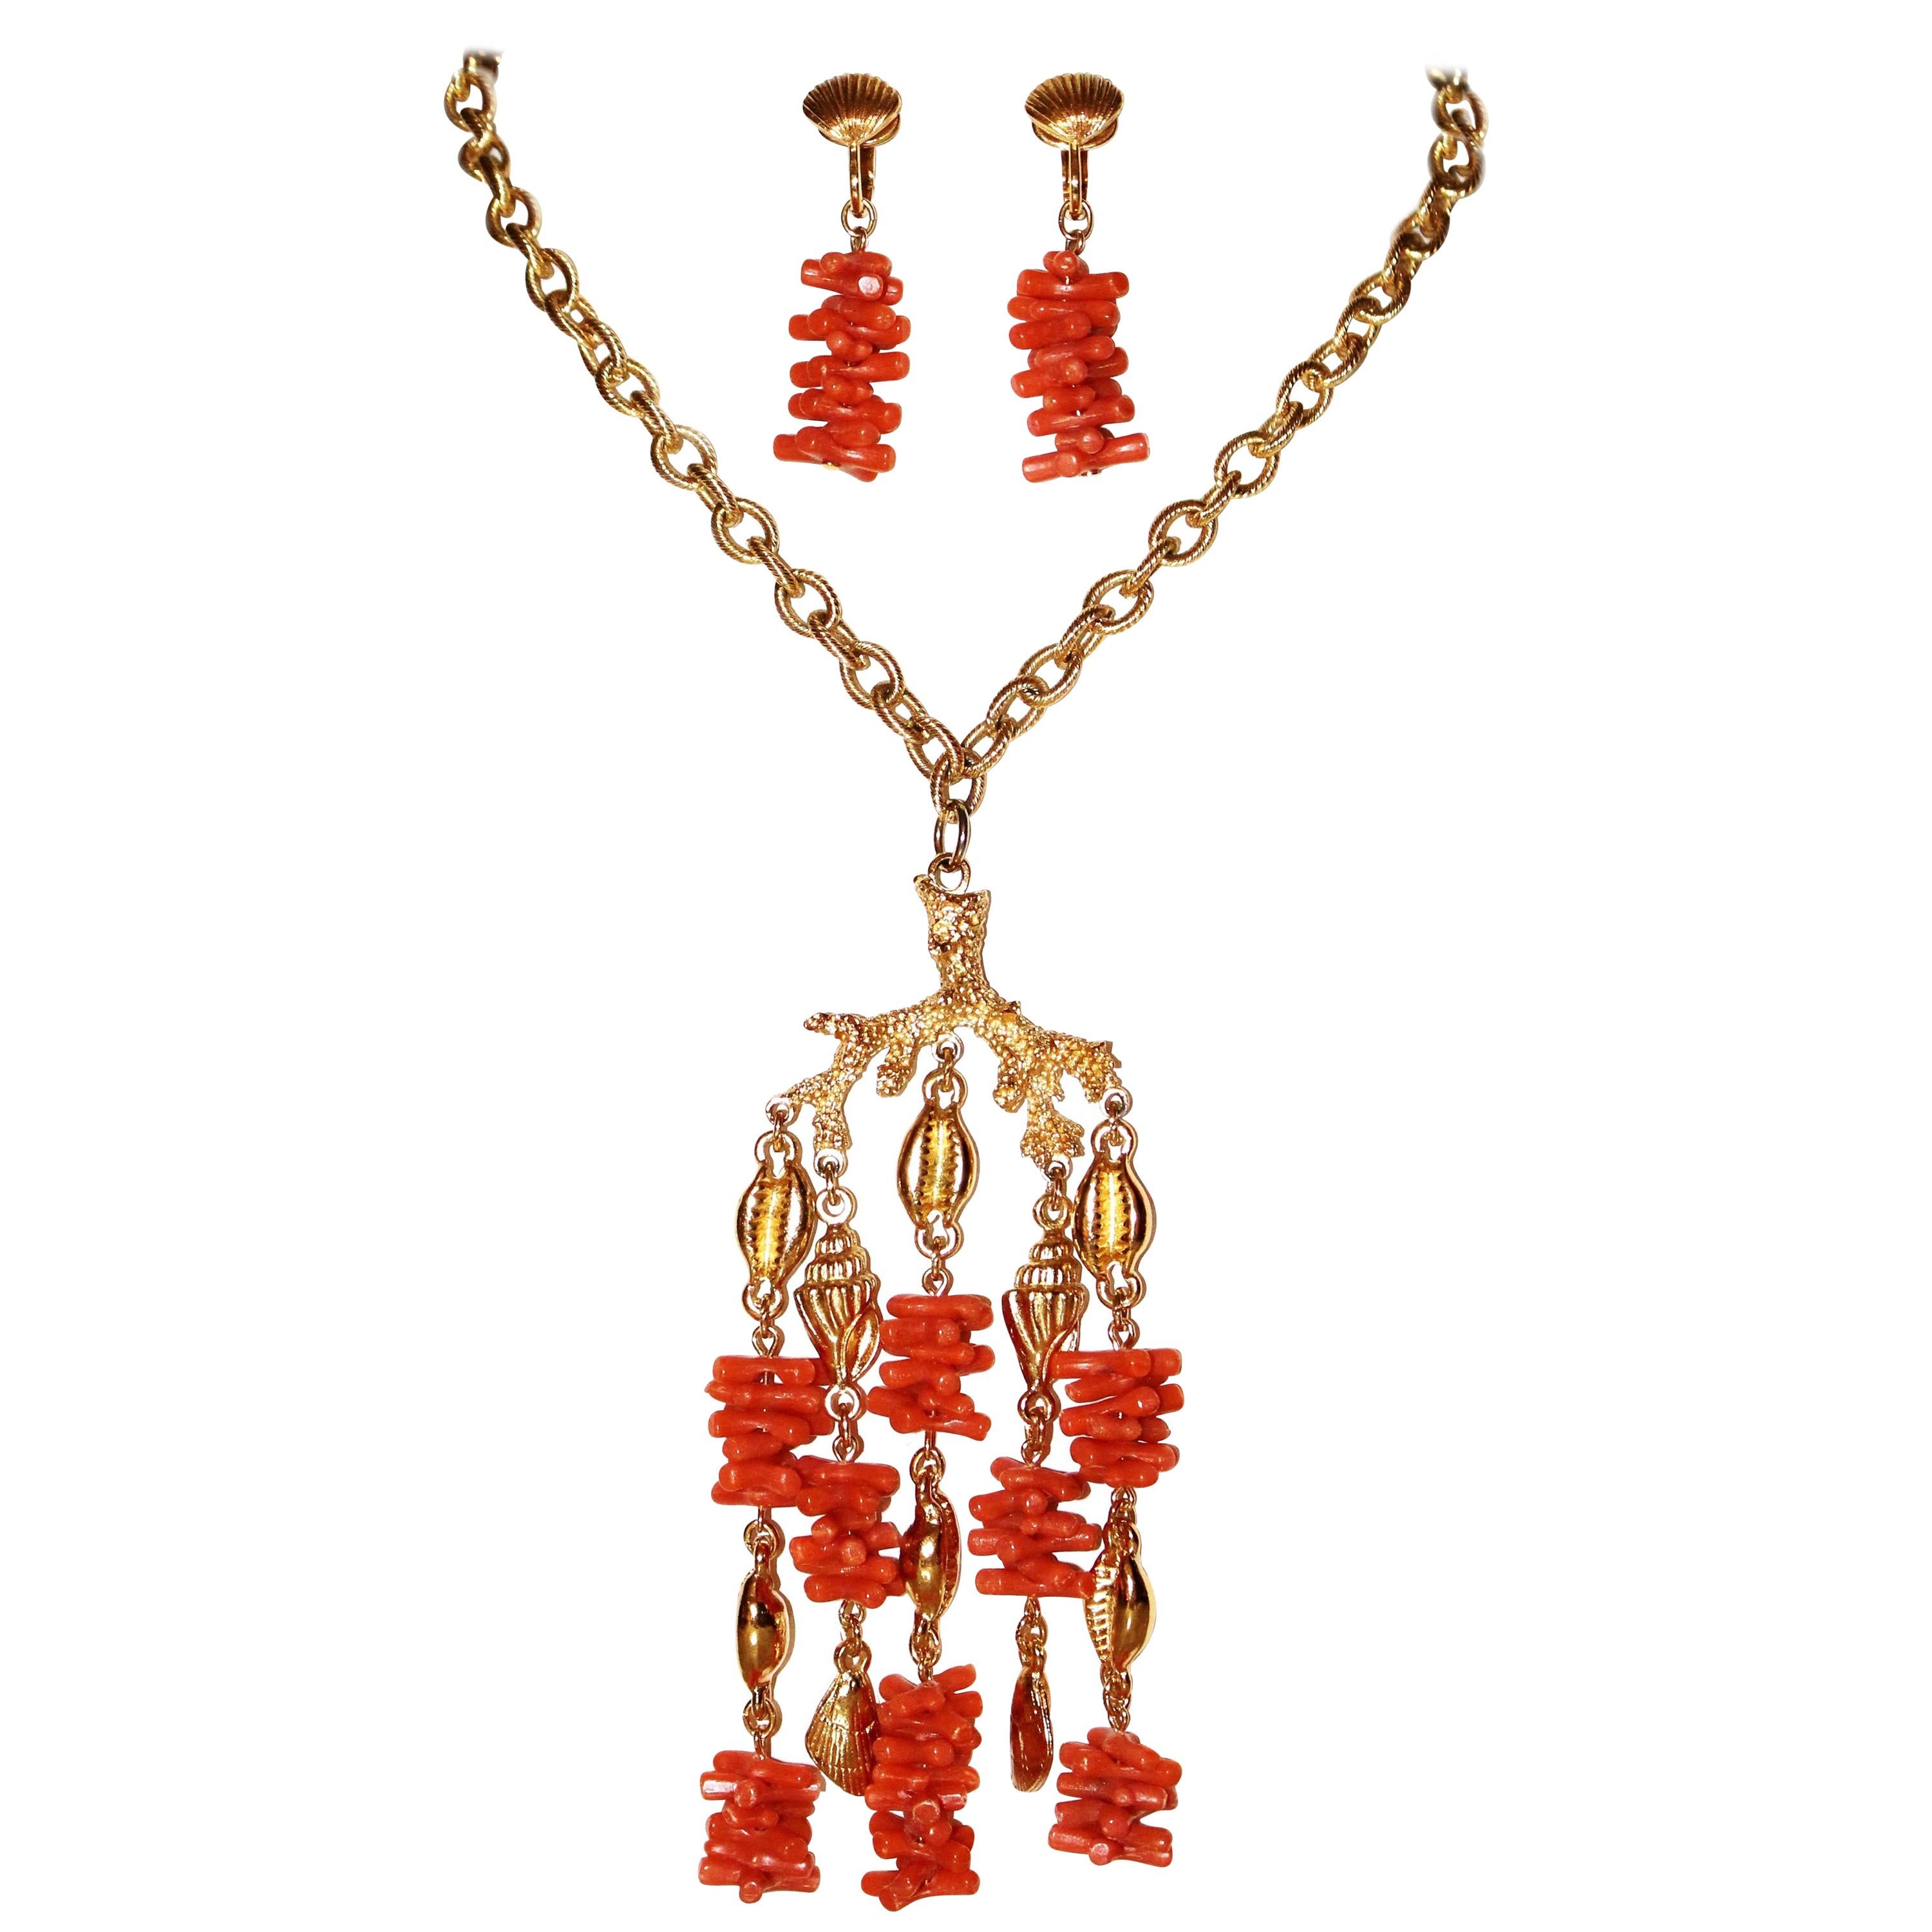 Circa 1960s Trifari Faux-Coral Necklace and Earrings Set im Angebot